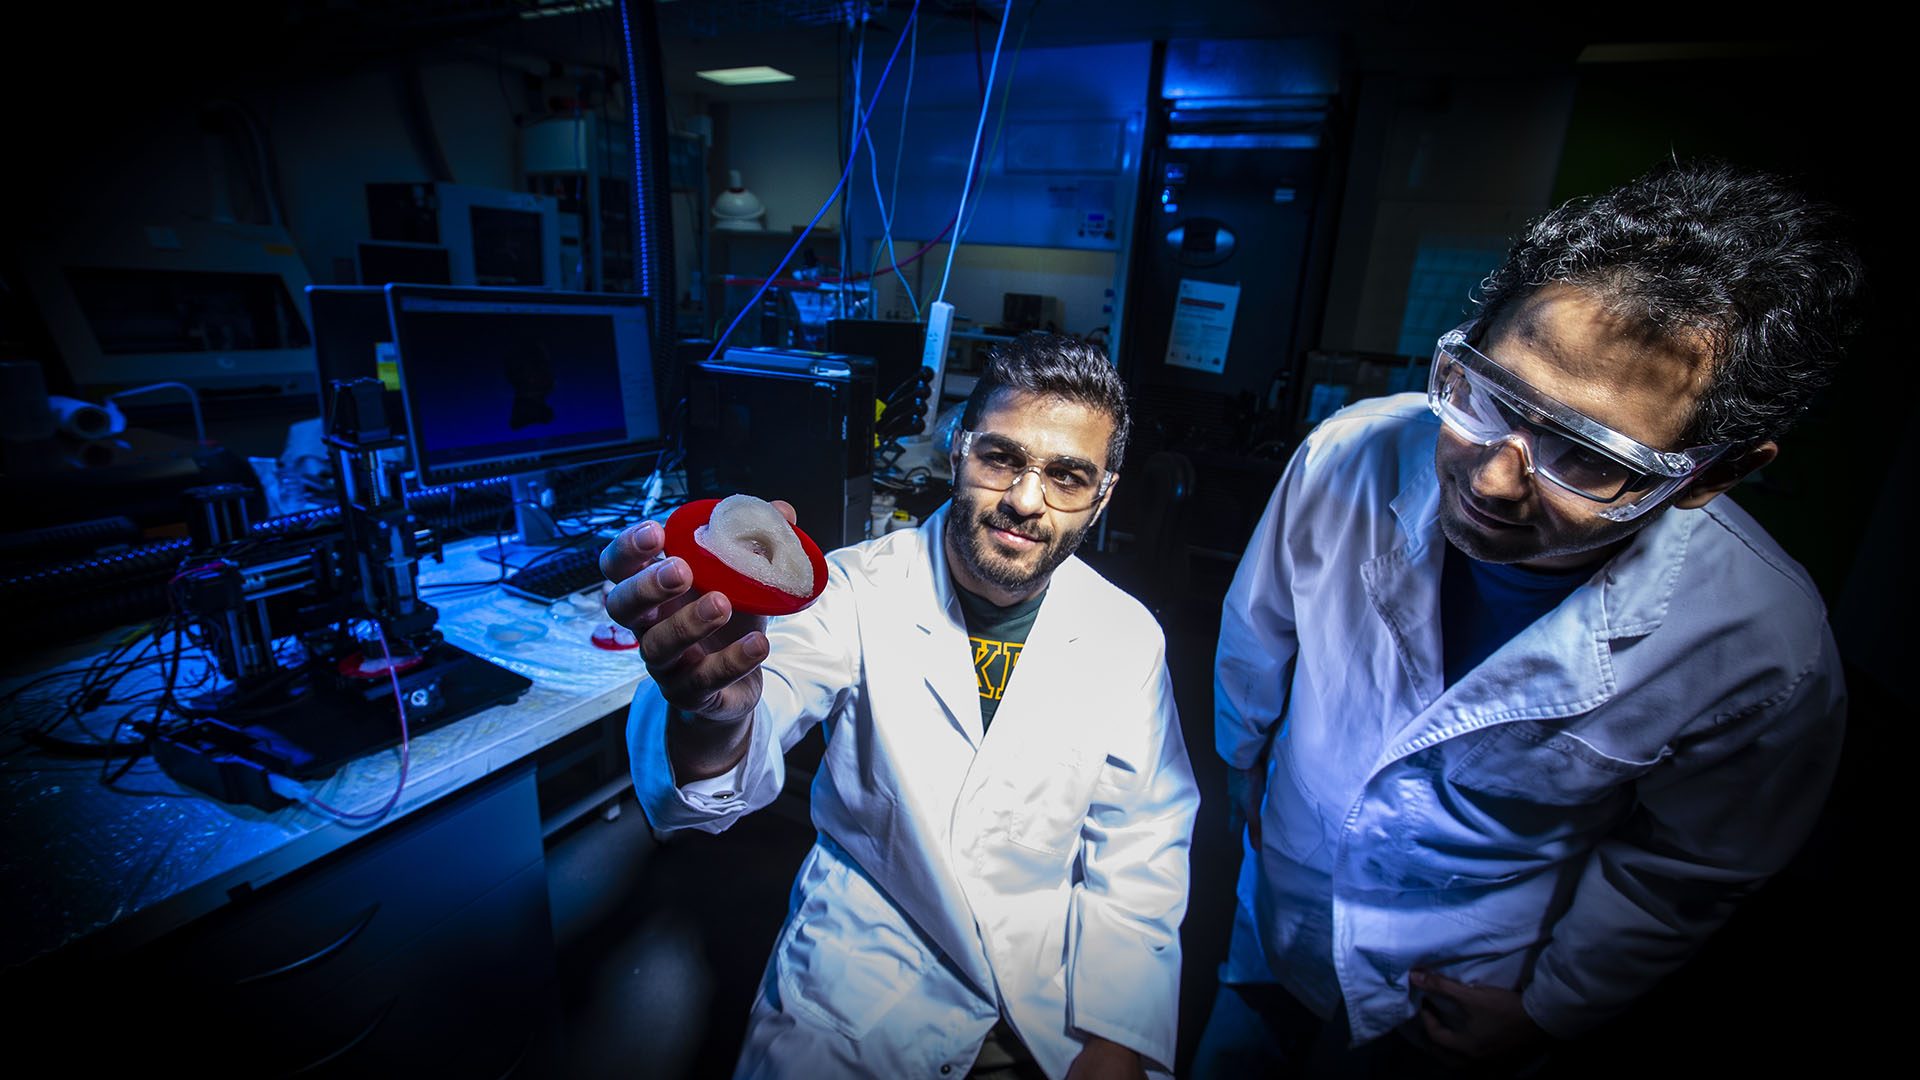 Wollongong-made 3D bioprinters hit the global stage